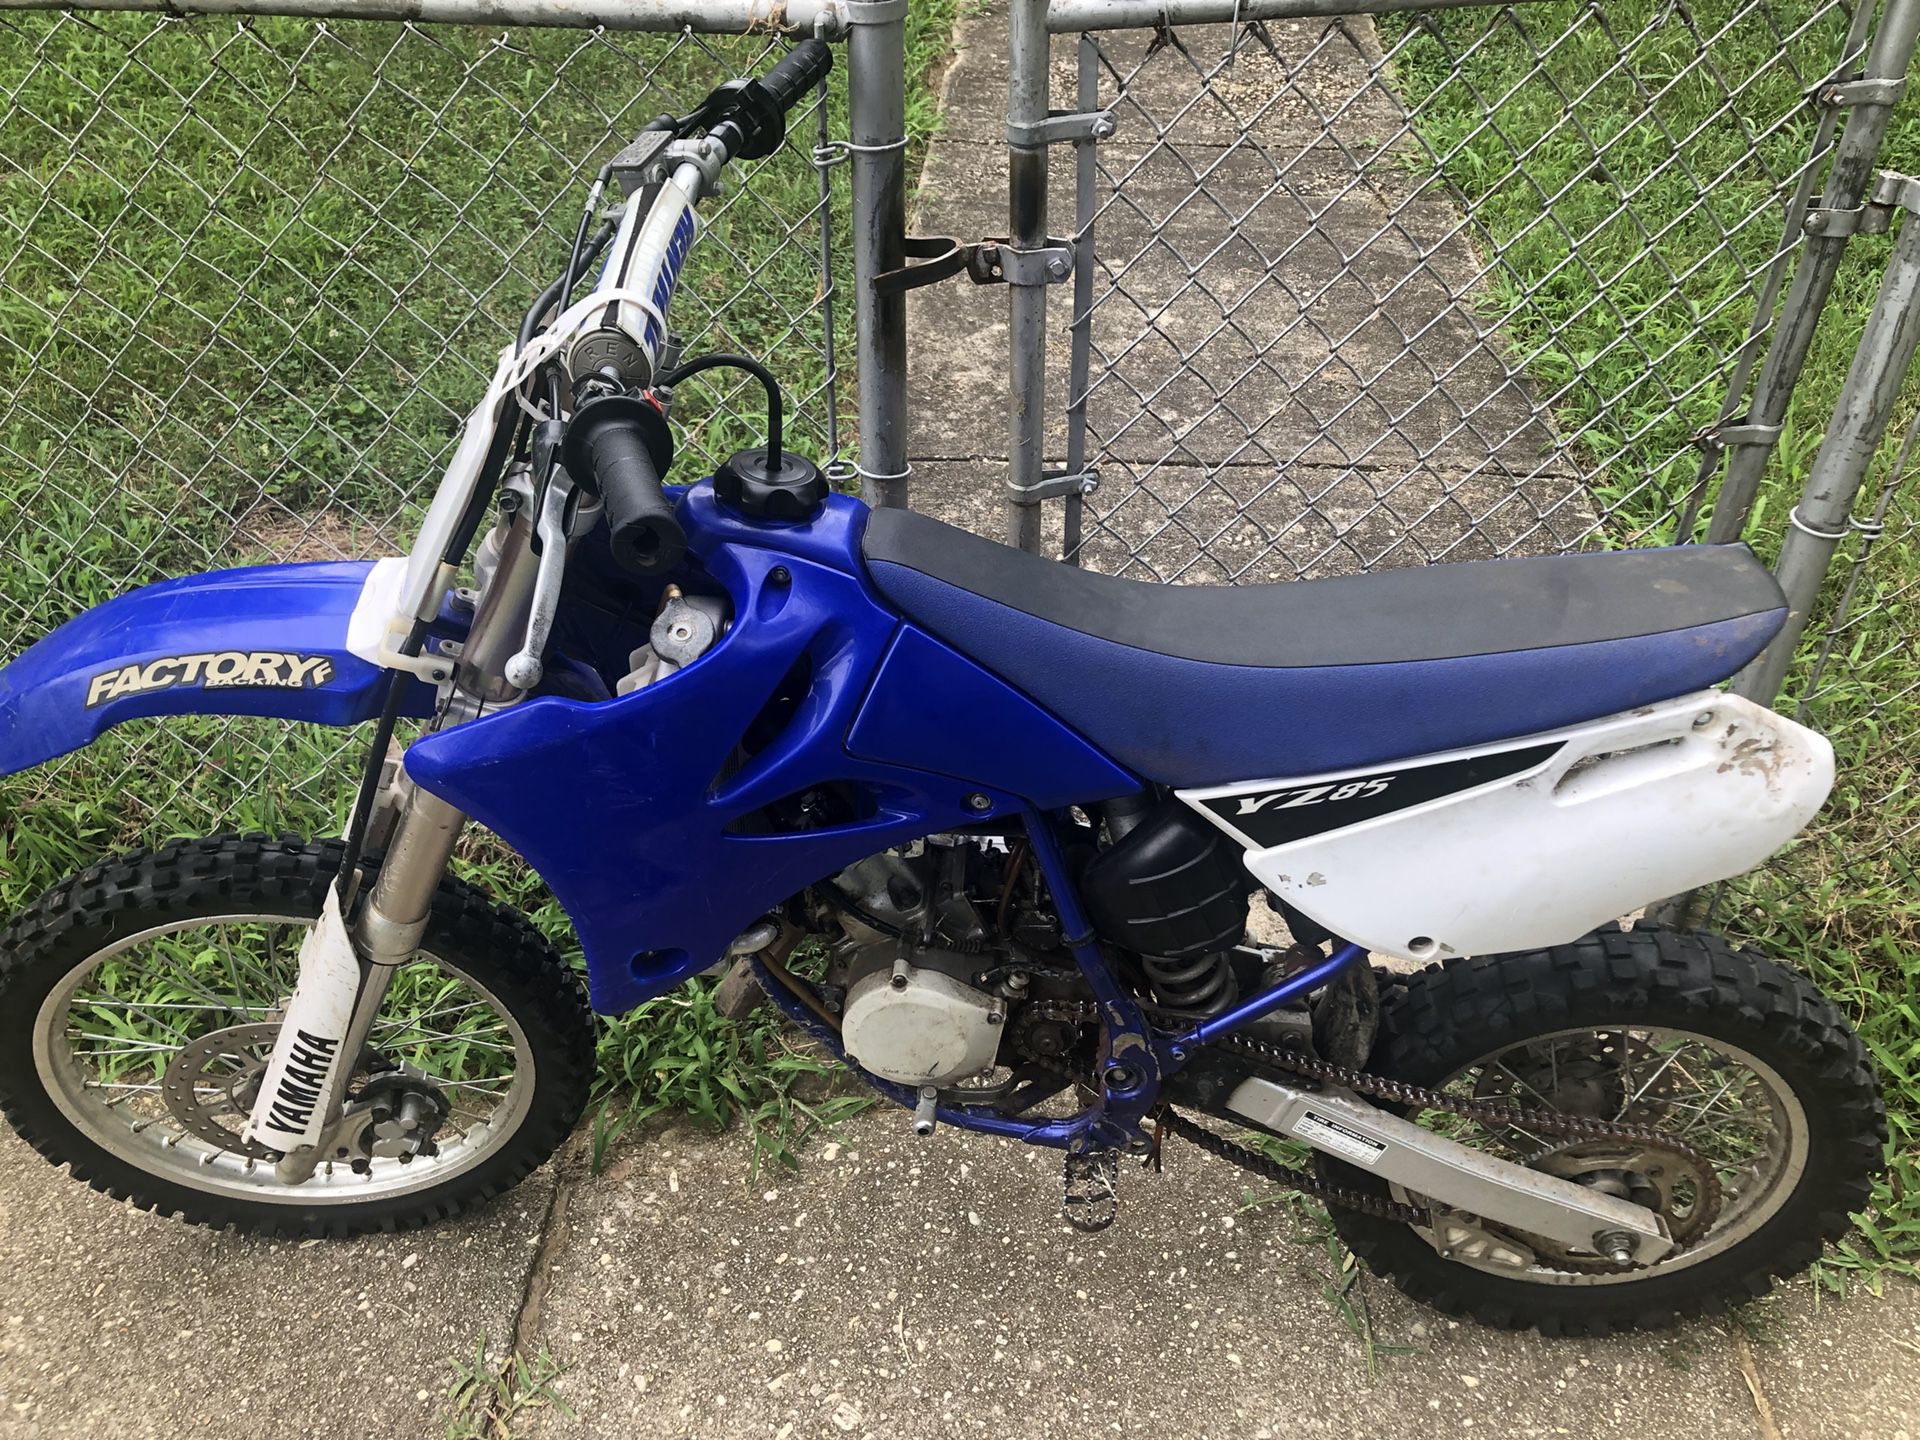 06 Yz 85 SMALL COOLANT LEAK! Title in hand. Willing to trade. Ran last month won’t start back up.